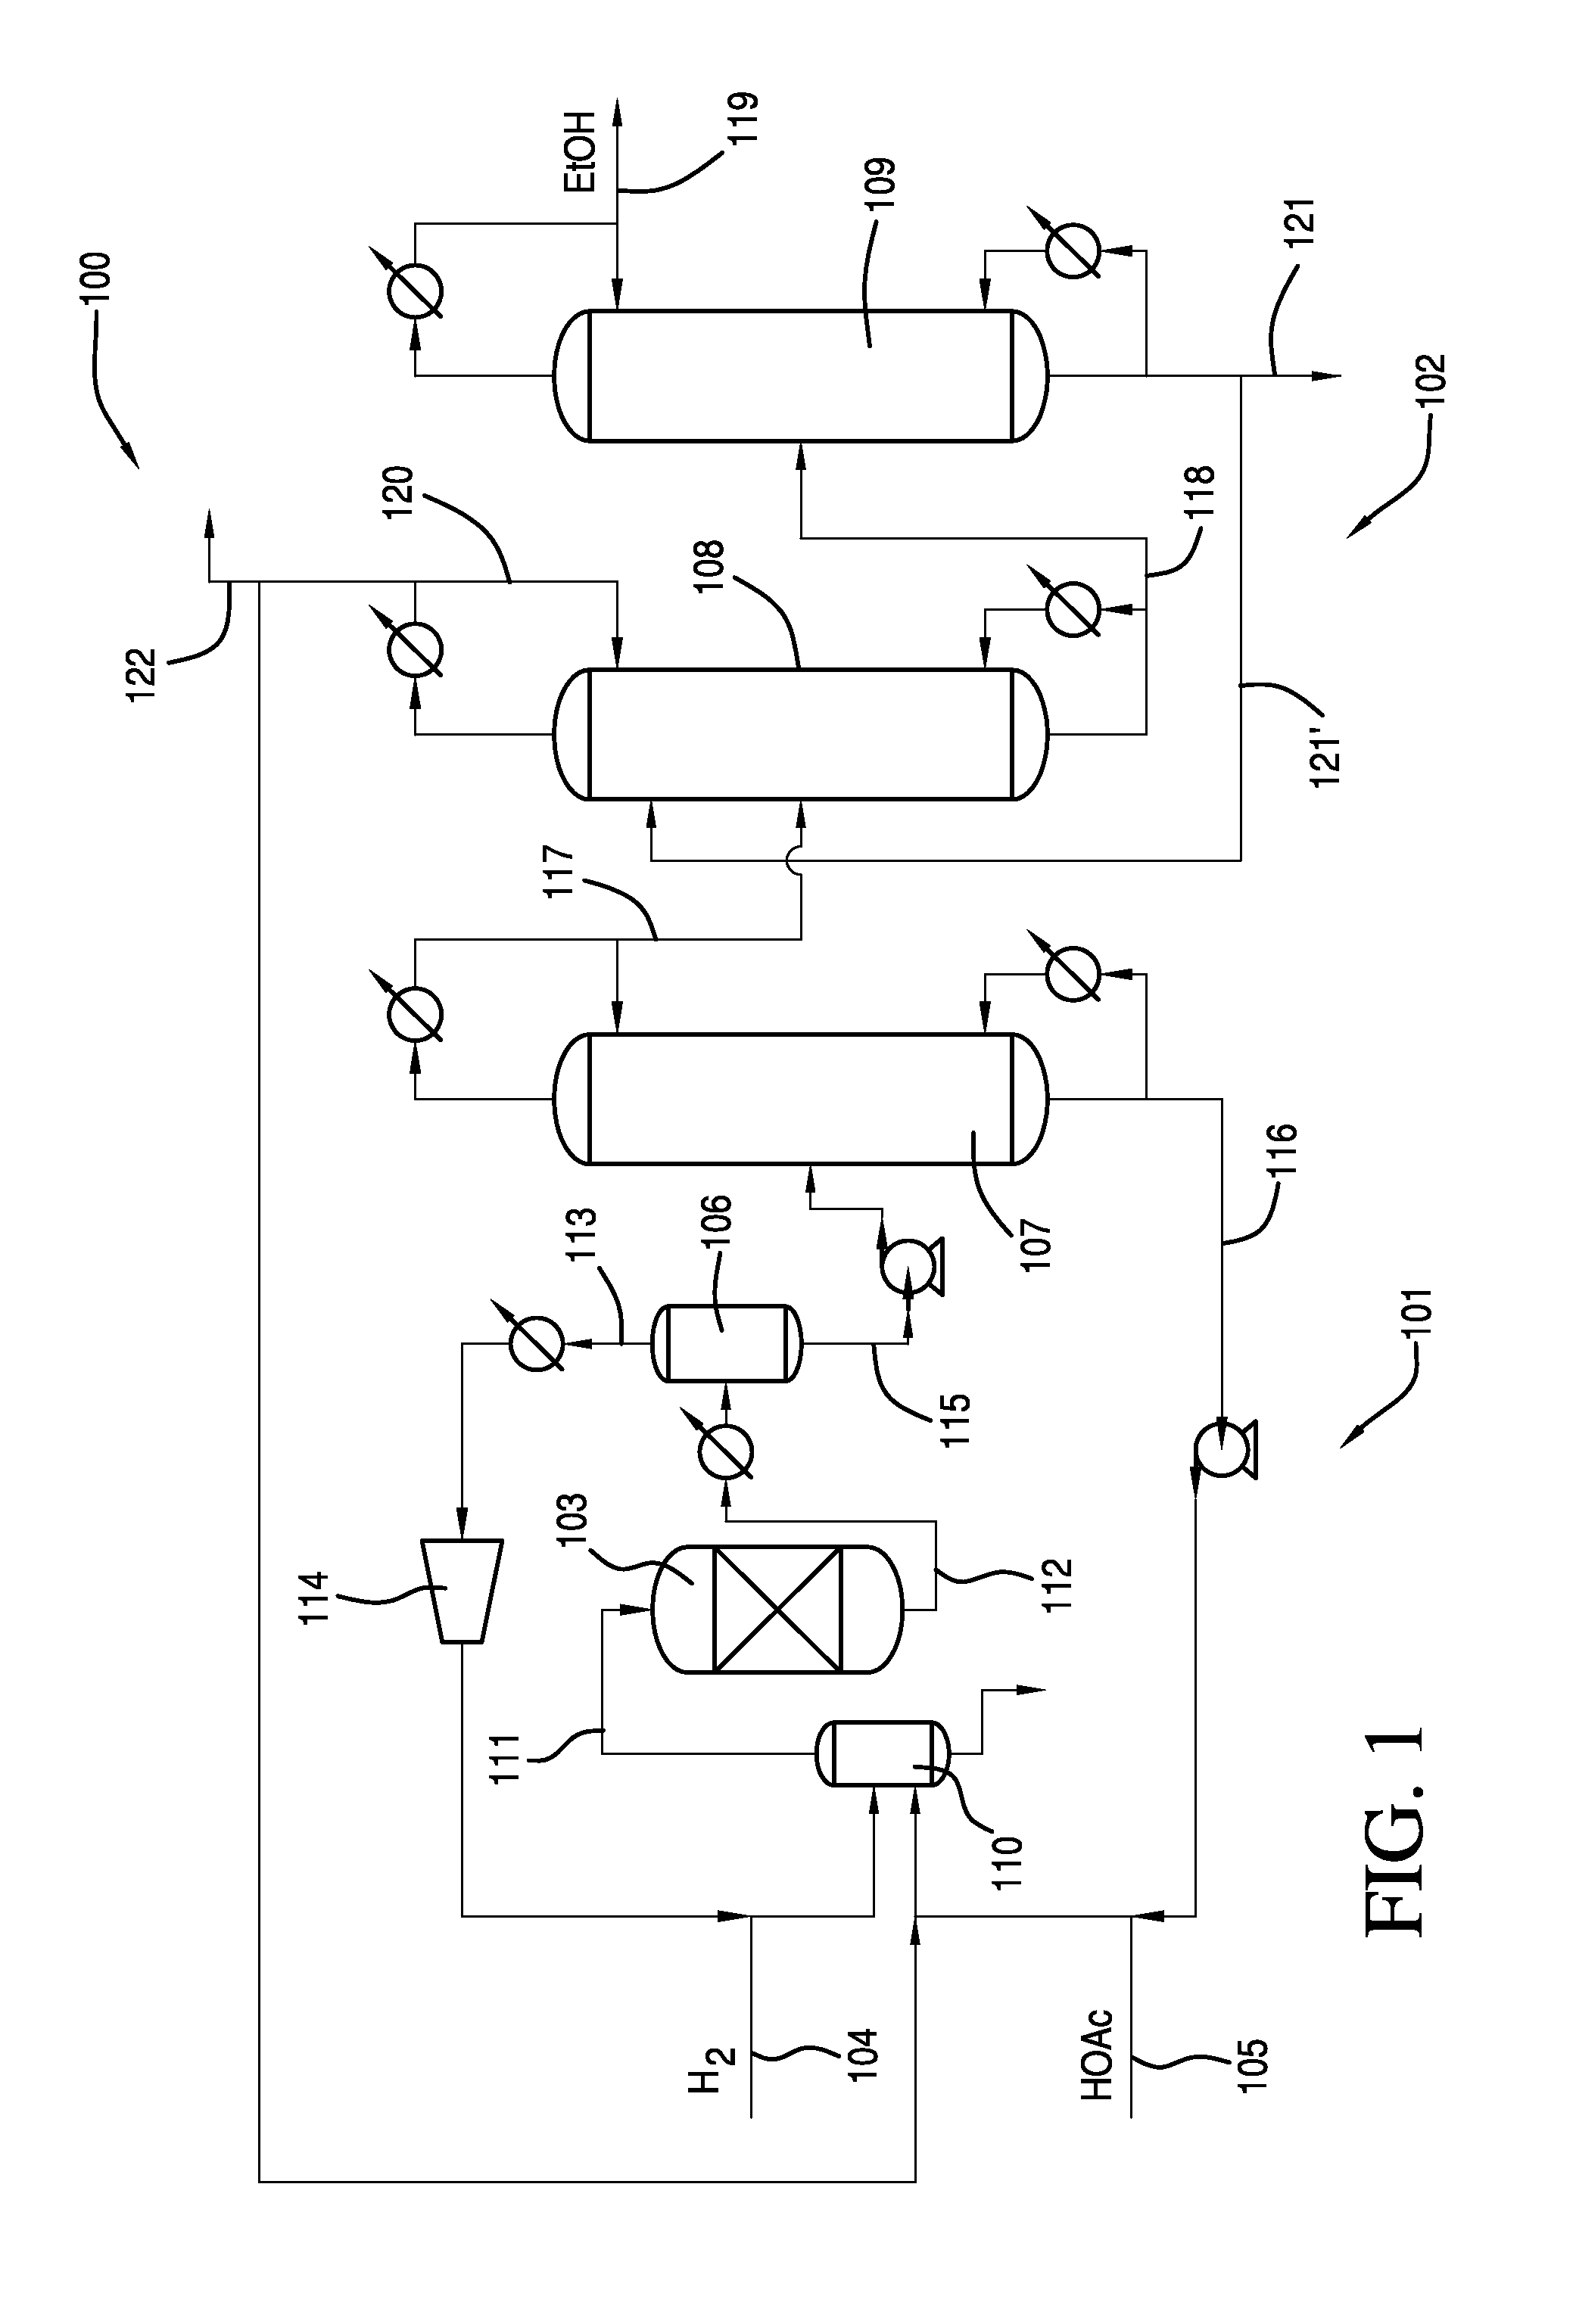 Process for Making Ethanol From Acetic Acid Using Acidic Catalysts